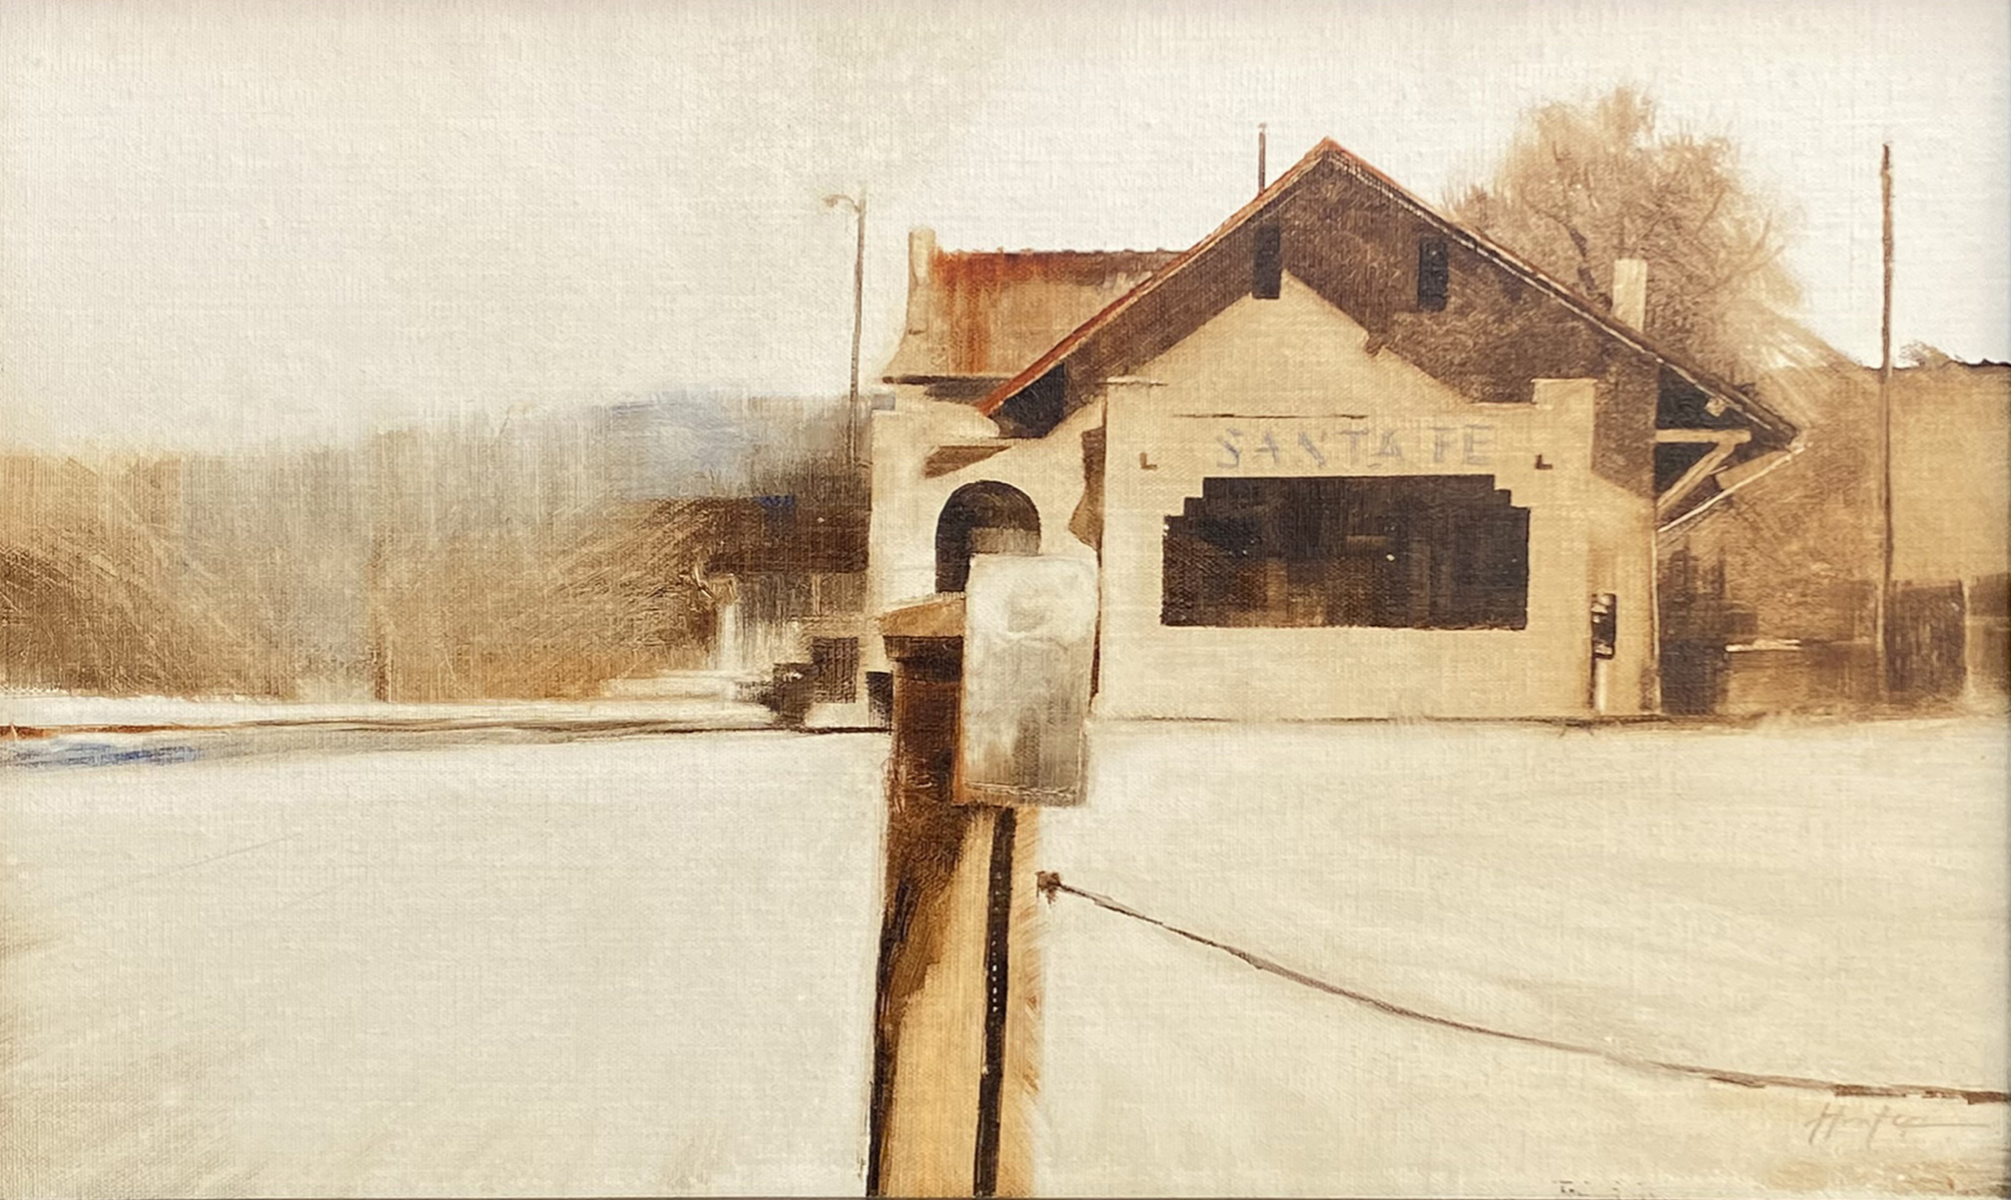 Oil painting of Santa Fe train station by Charlie Hunter